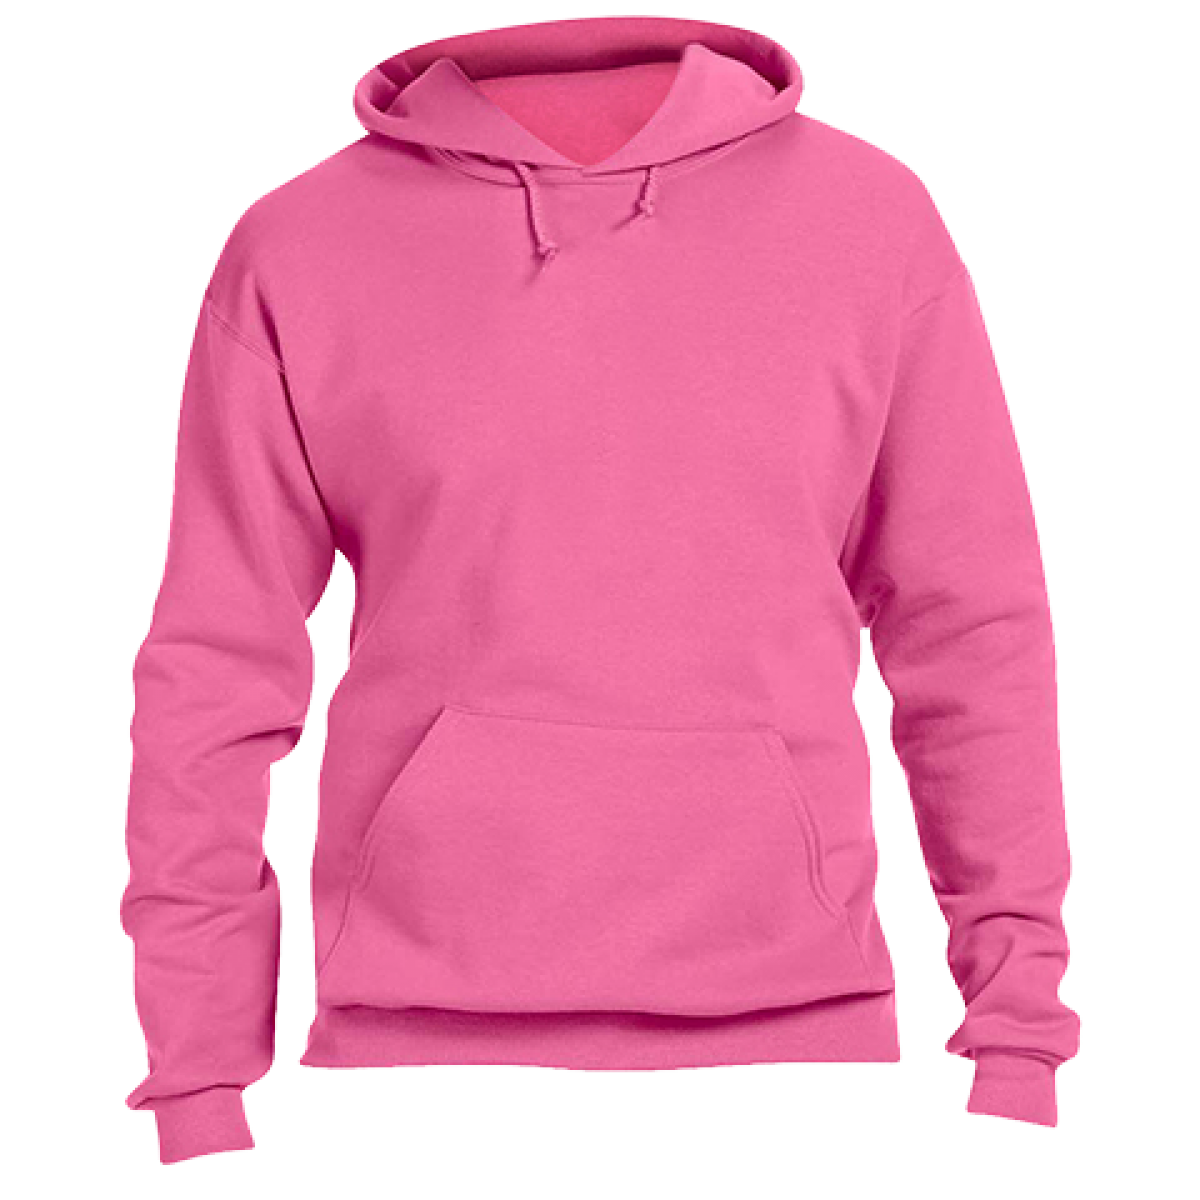 Cotton Hoody / Safety Pink-2XL